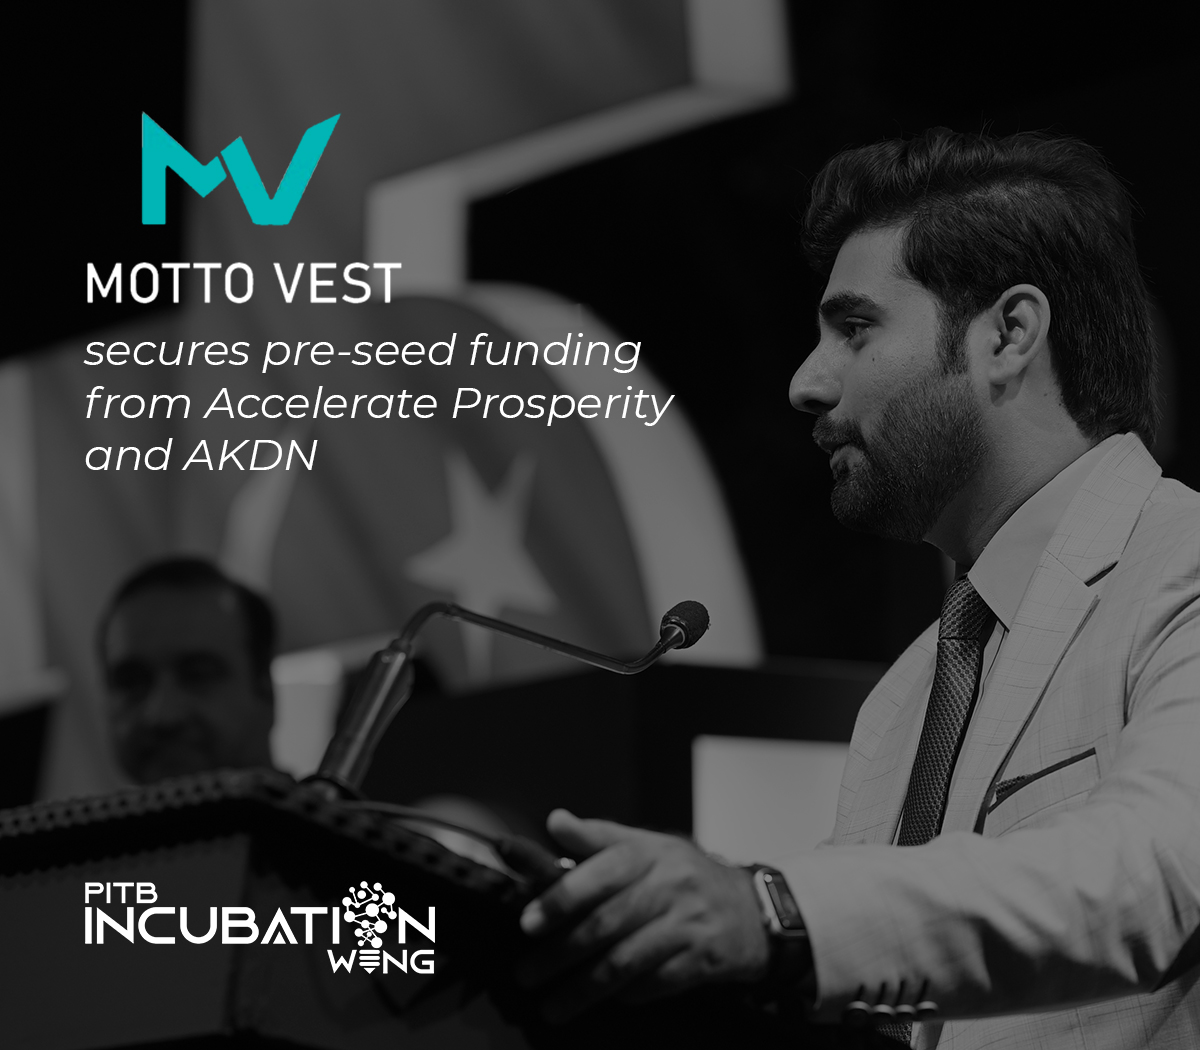 🏍️ Exciting news! Our own #MottoVest, from the PITB Incubation Wing alumni, is revolutionizing biker safety with self-inflatable airbag vests. They just secured a 7-figure funding round & partnered with @ApProsperity of @akdn! #SuccessStory